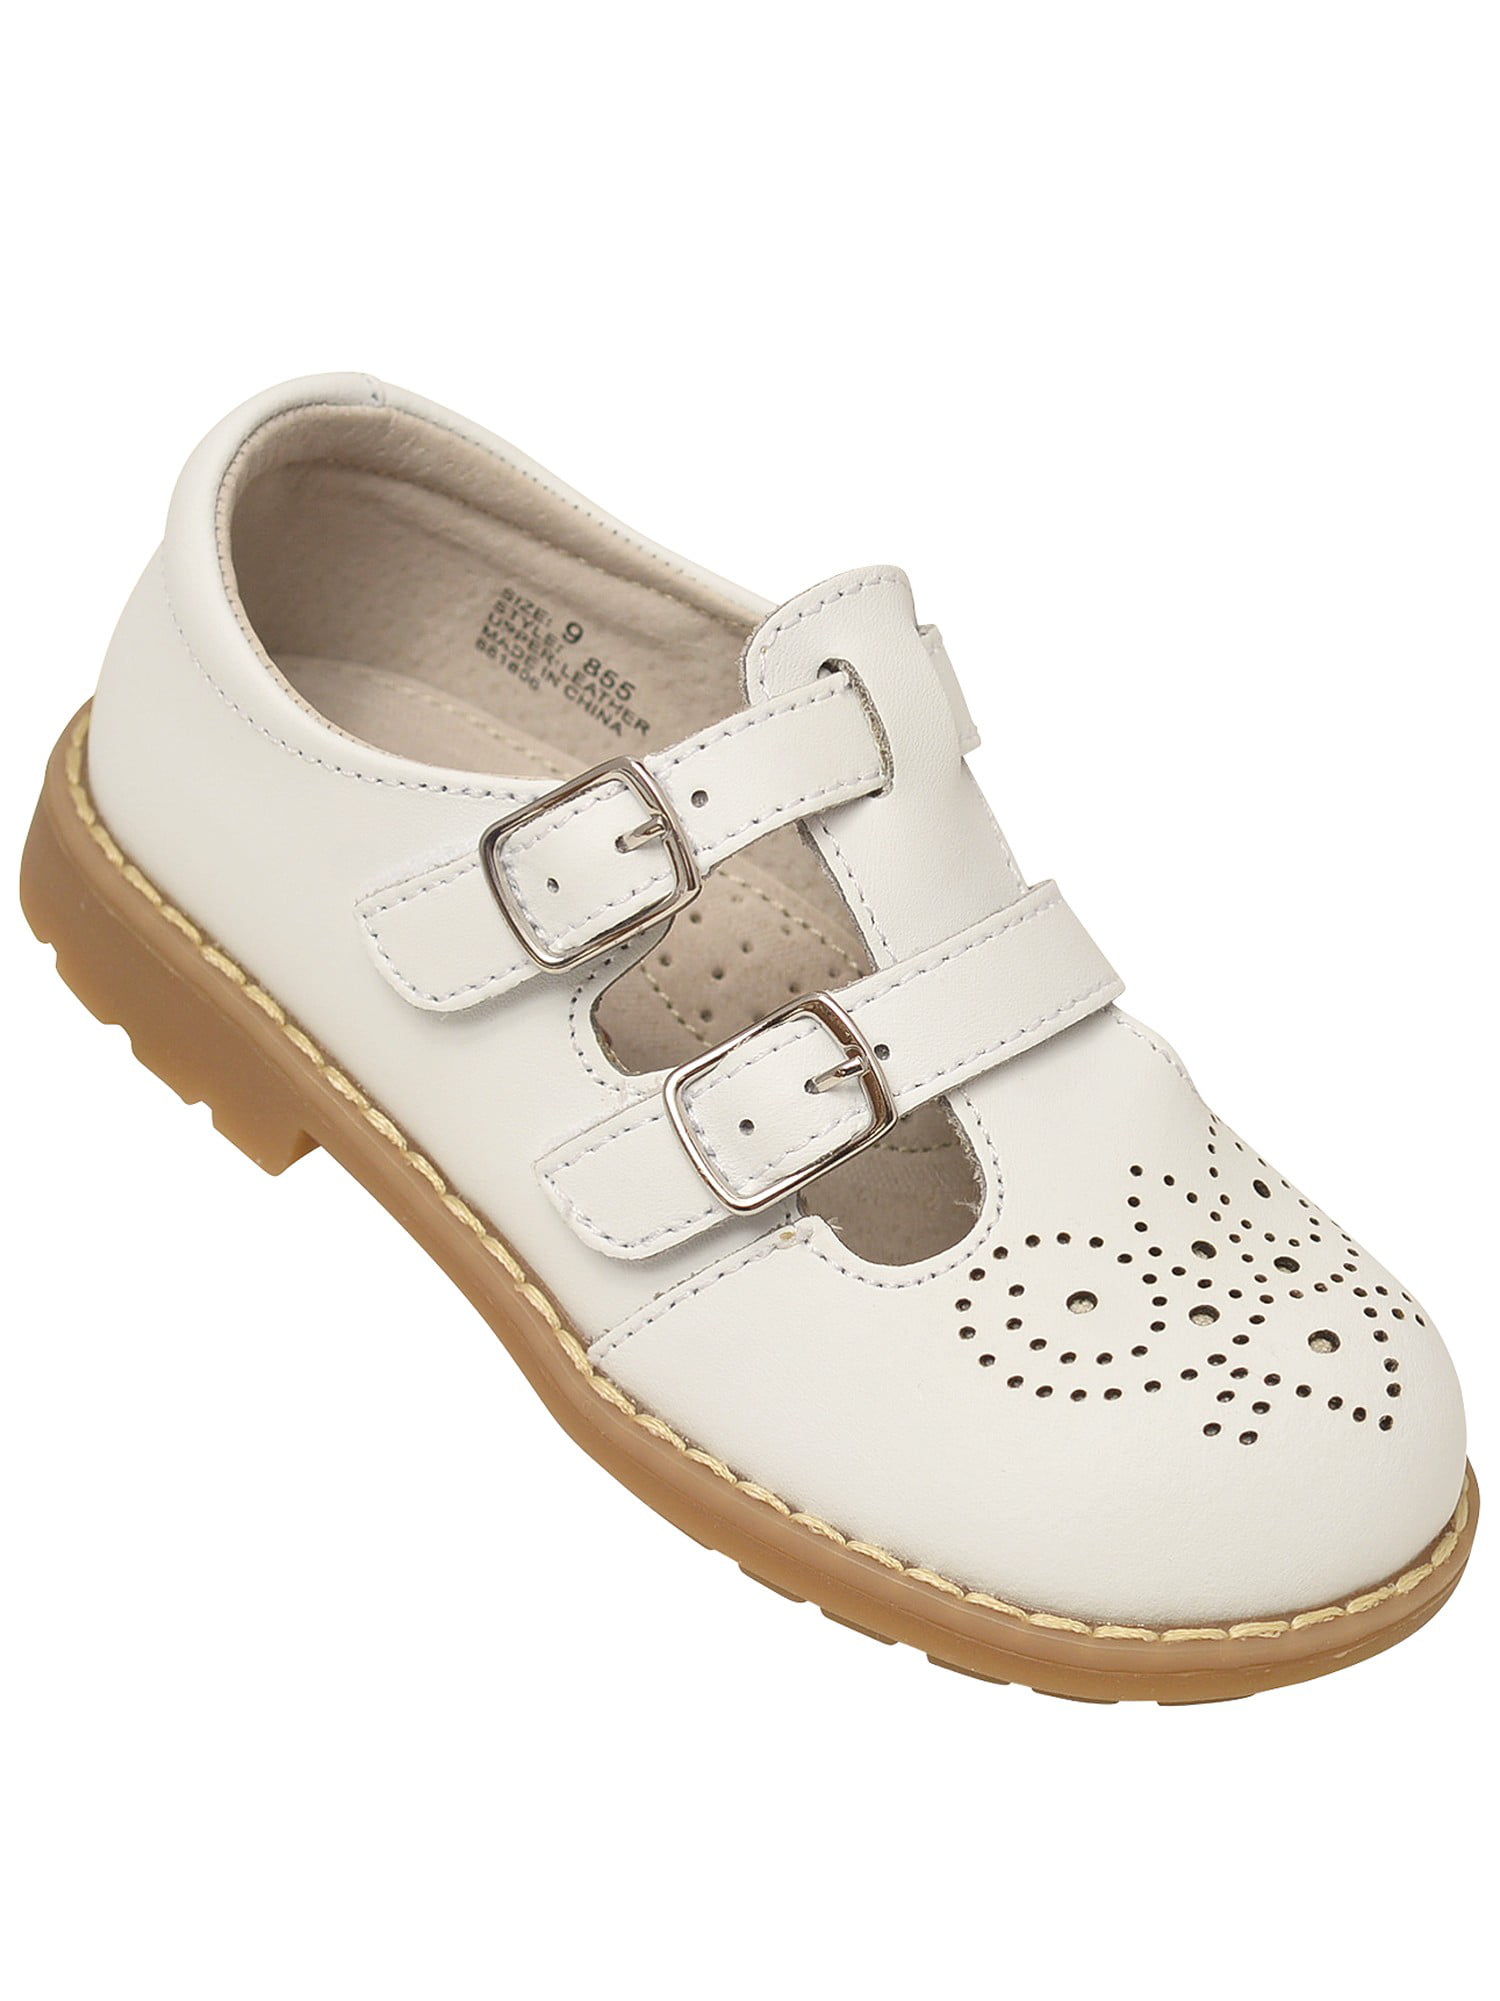 little girl white mary jane shoes